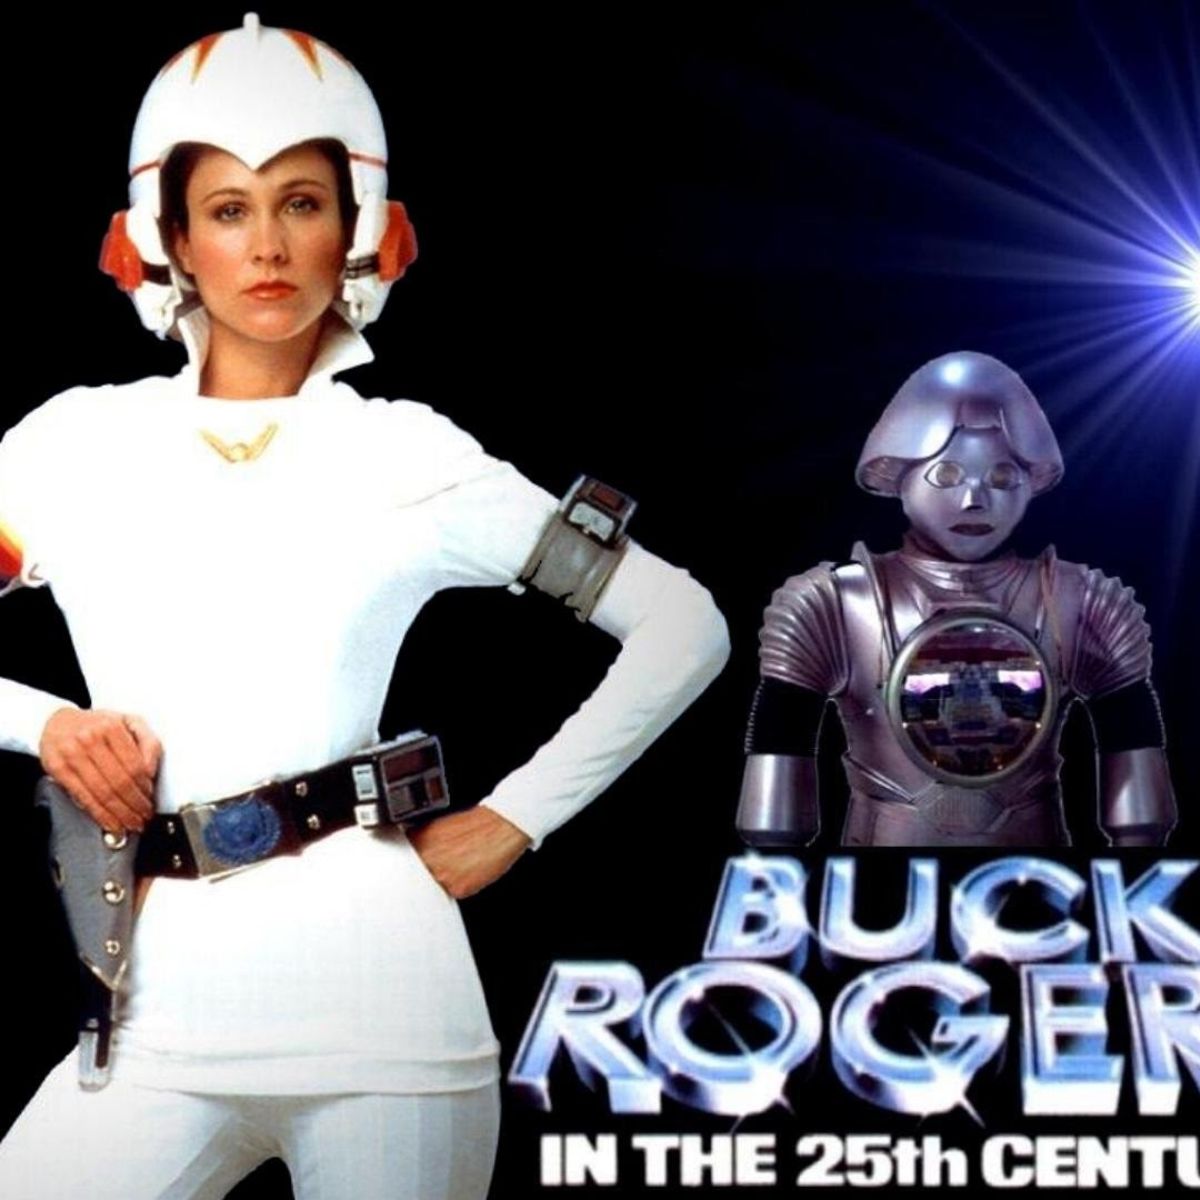 Image result for buck rogers in the 25th century